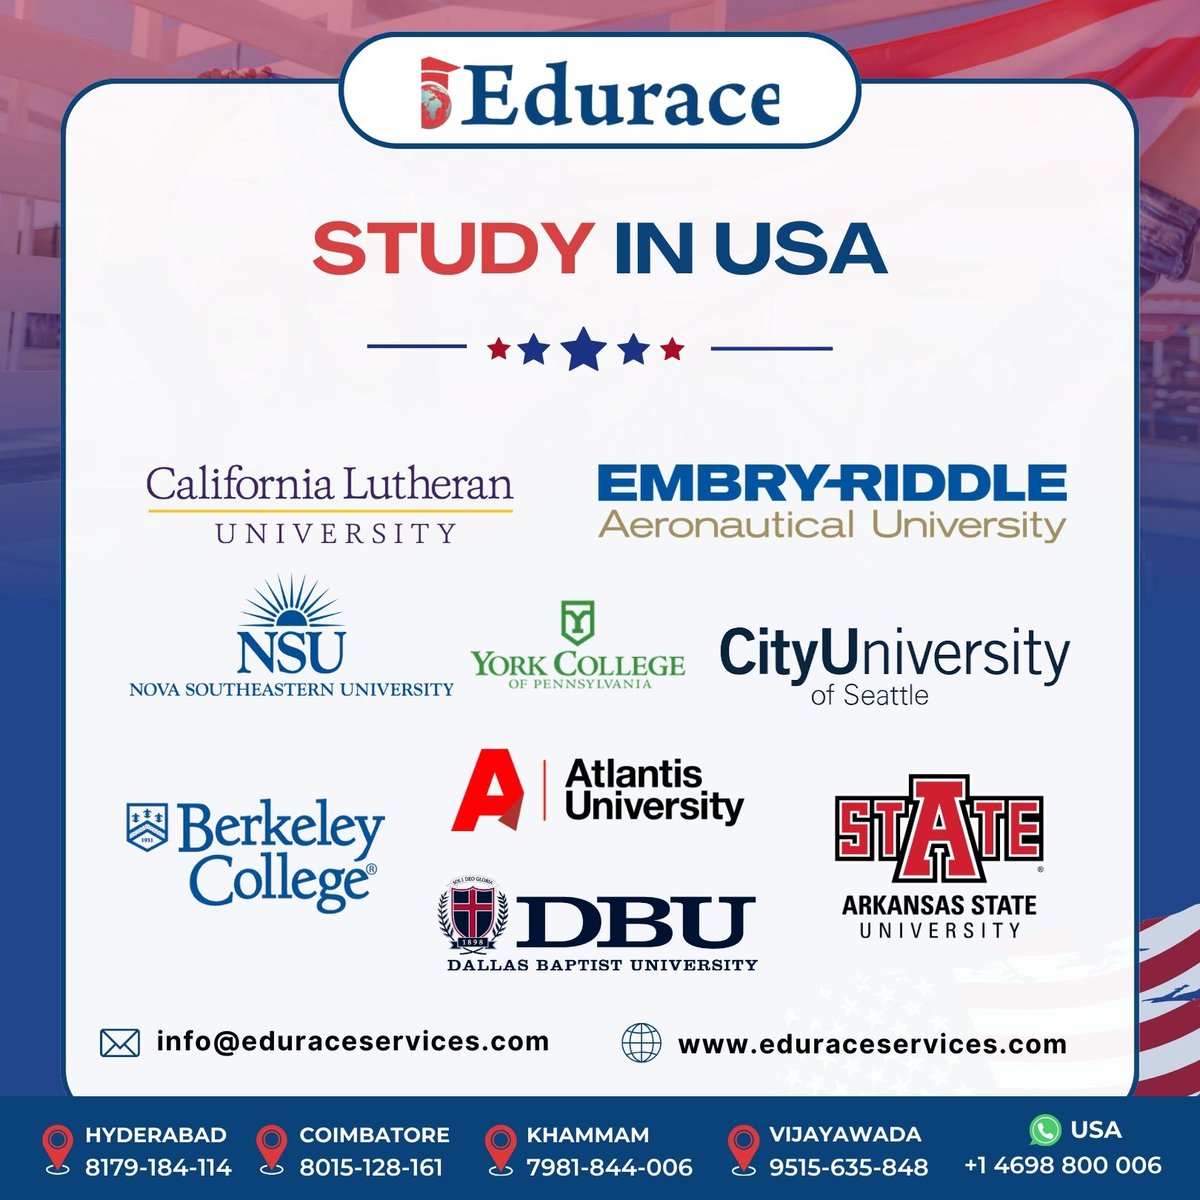 Unlock your potential and study in the USA! 🎓✨ Now accepting applications for the September 2024 intake. Your journey to academic excellence starts here.

#study #studyabroad #studygram #studyinusa #students #studentslife #overseaseducation #globalcareer #eduraceservices